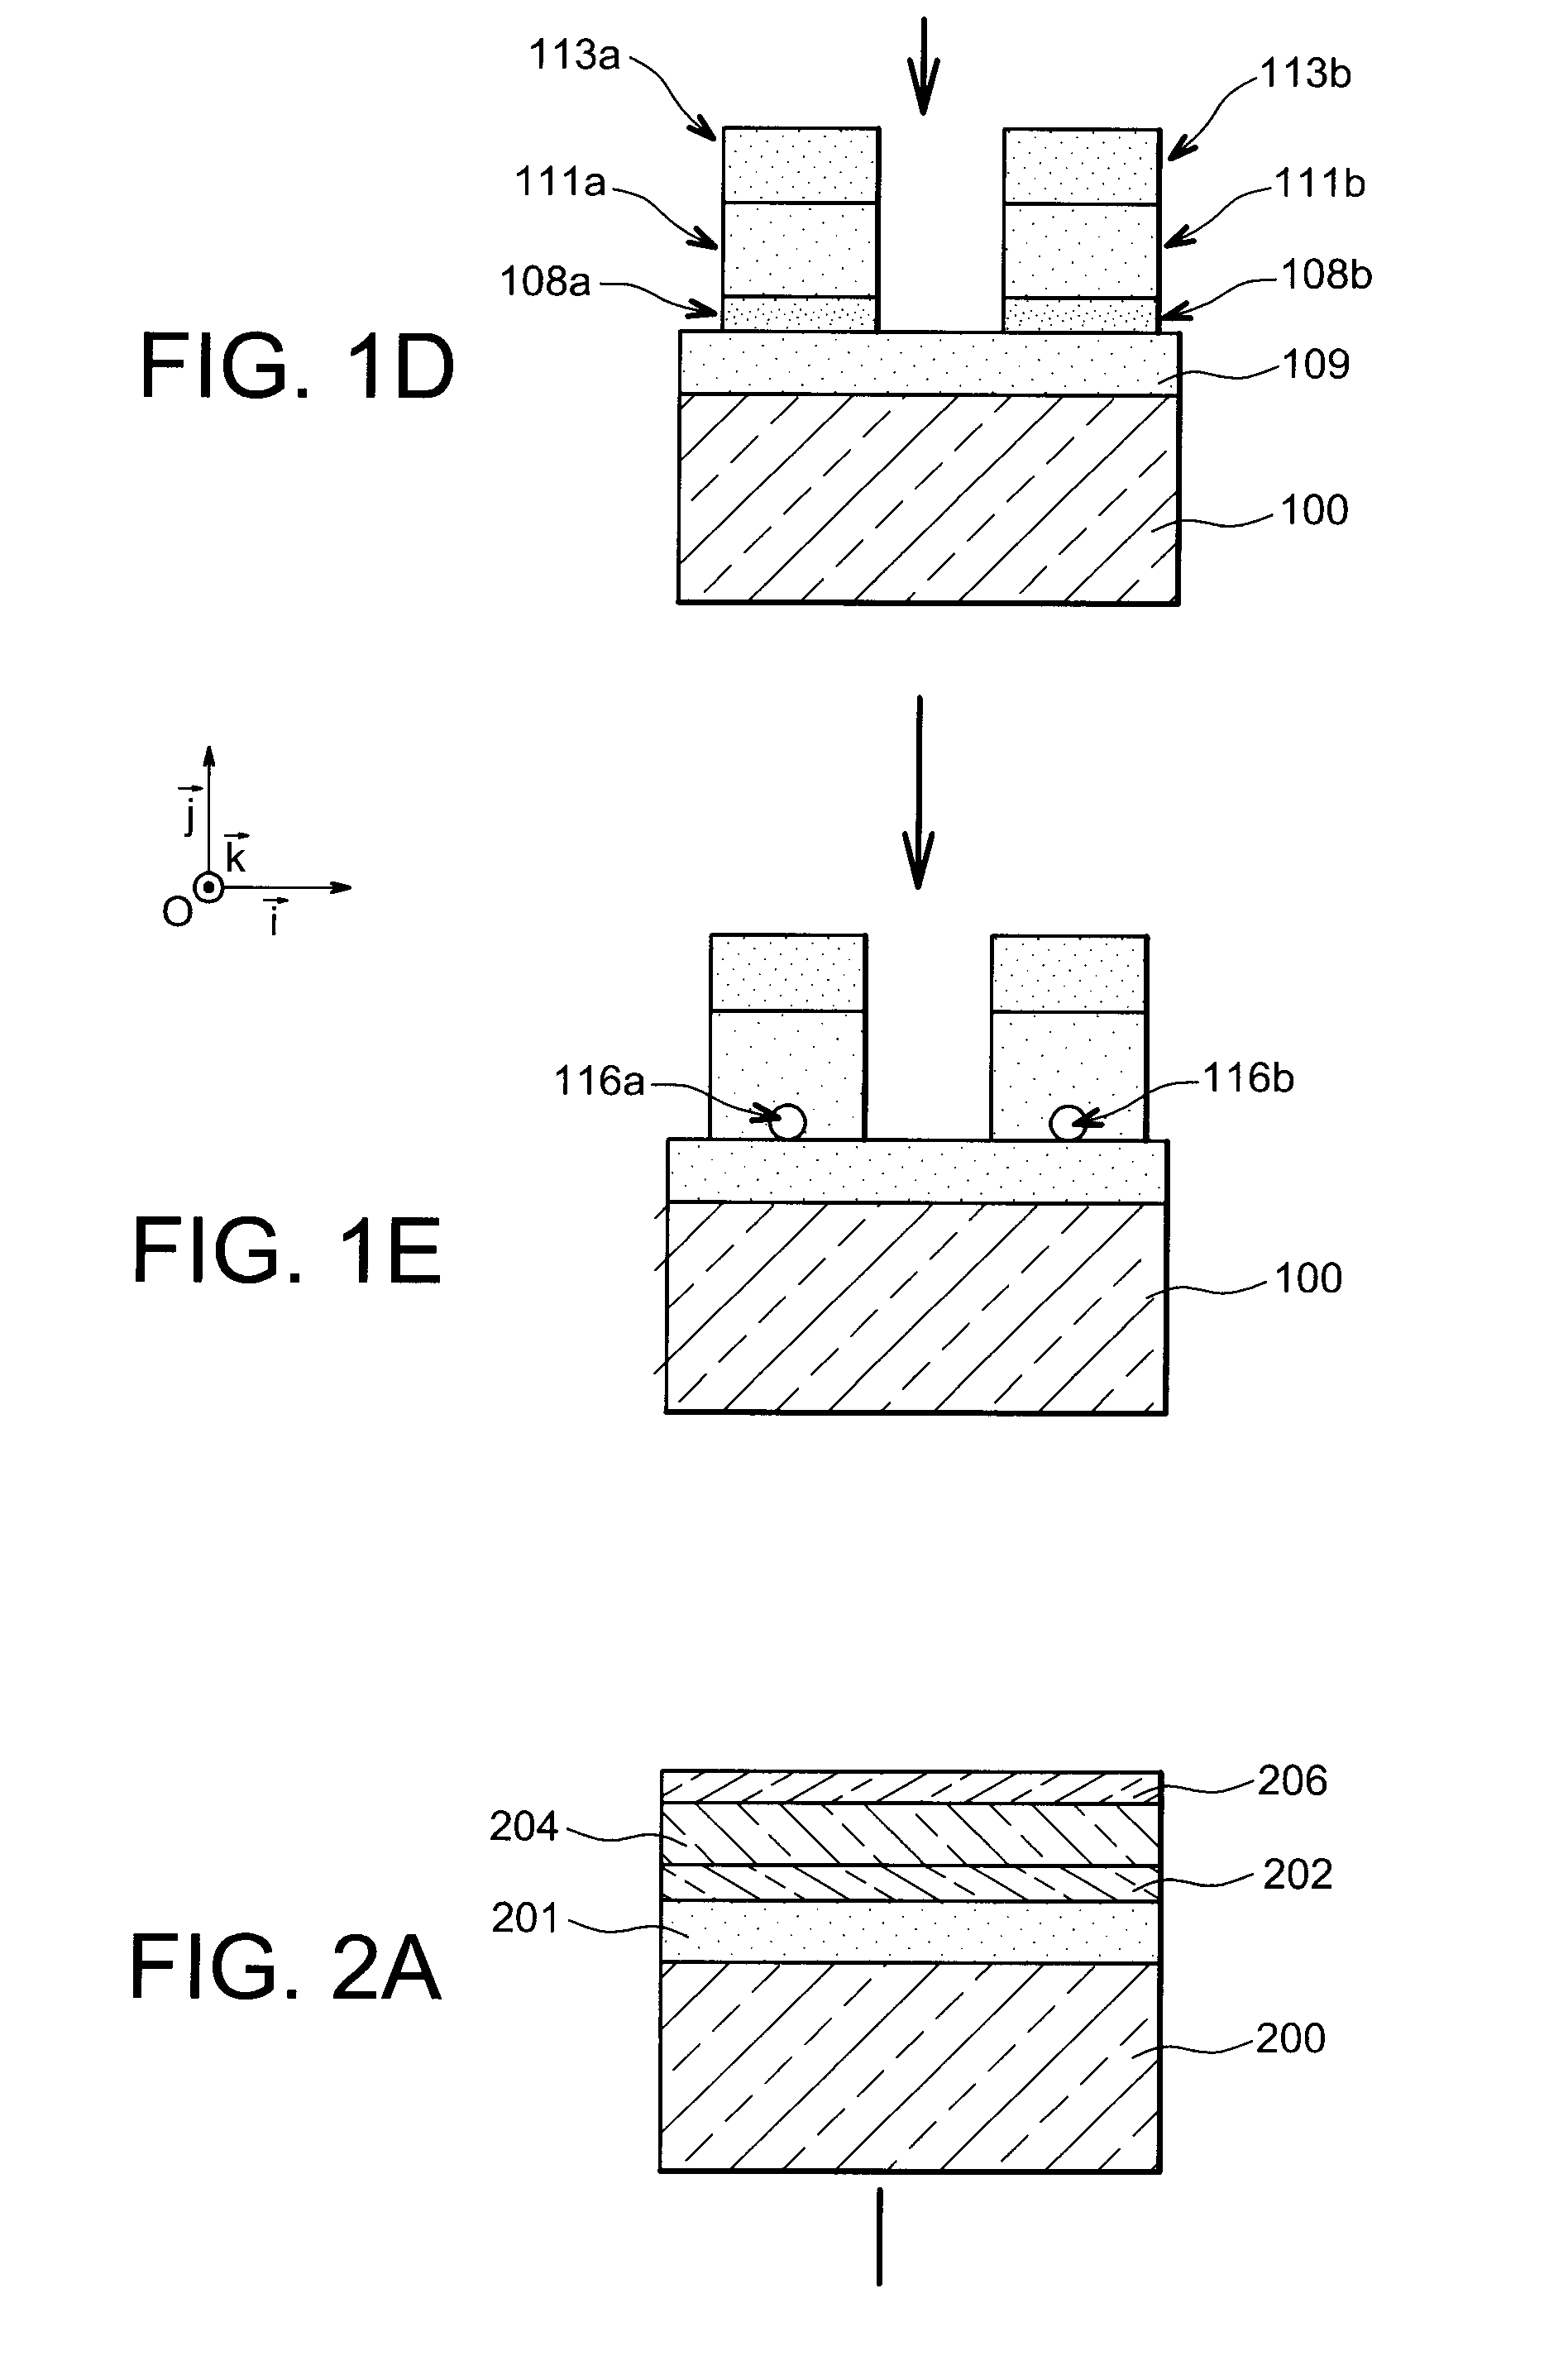 Method for producing a device comprising a structure equipped with one or more microwires or nanowires based on a Si and Ge compound by germanium condensation